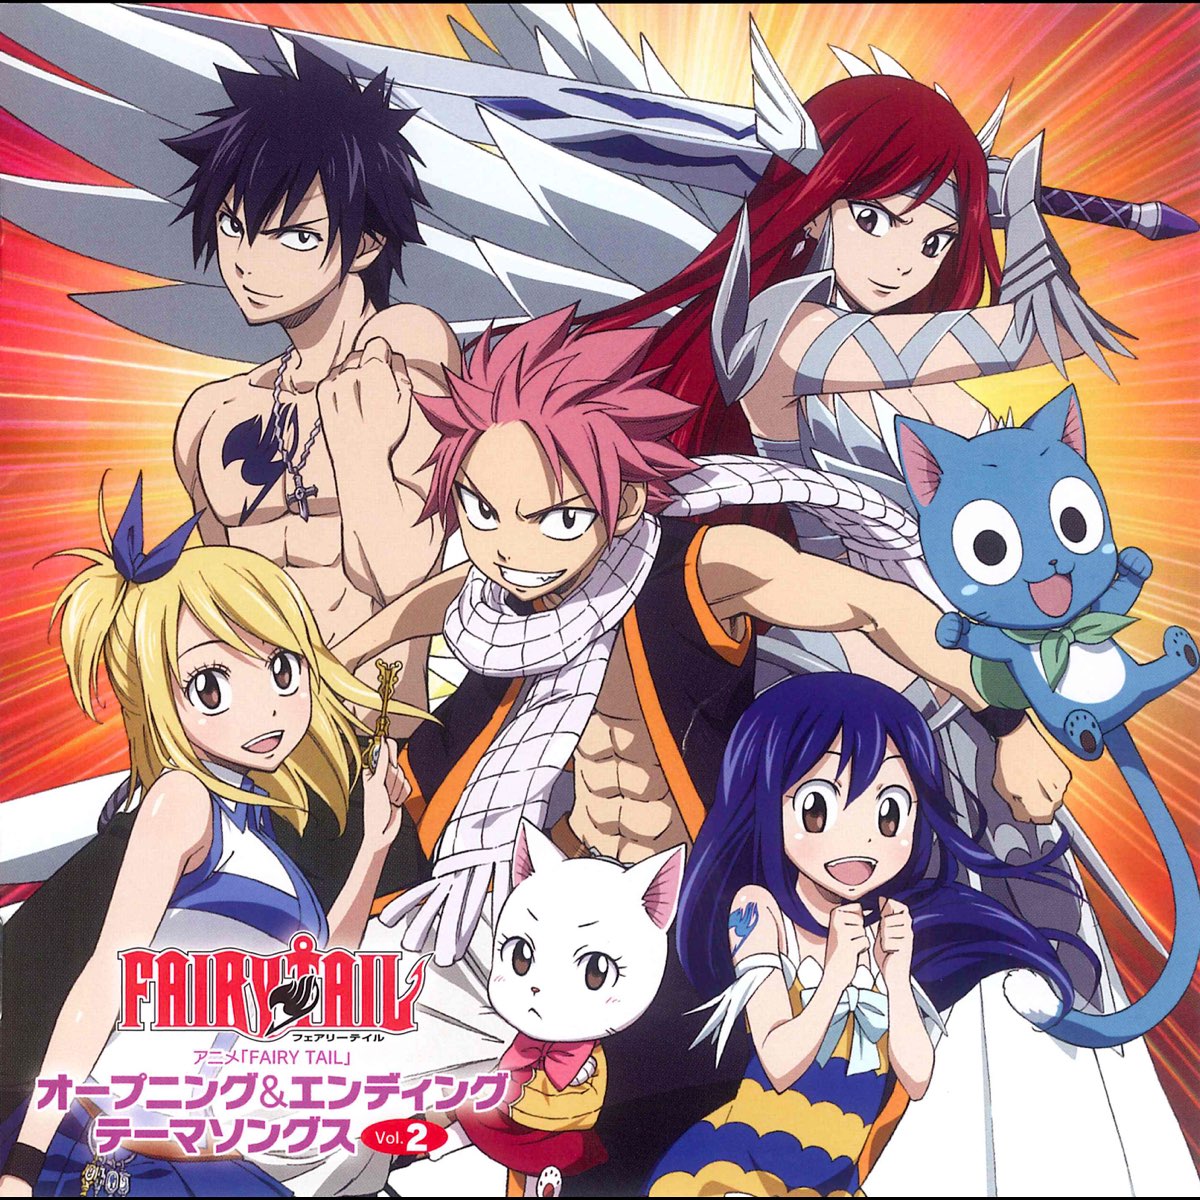 Tv Anime "Fairy Tail" Op & Ed Theme Songs Vol. 2 (Standard Edition) - Album  by Various Artists - Apple Music